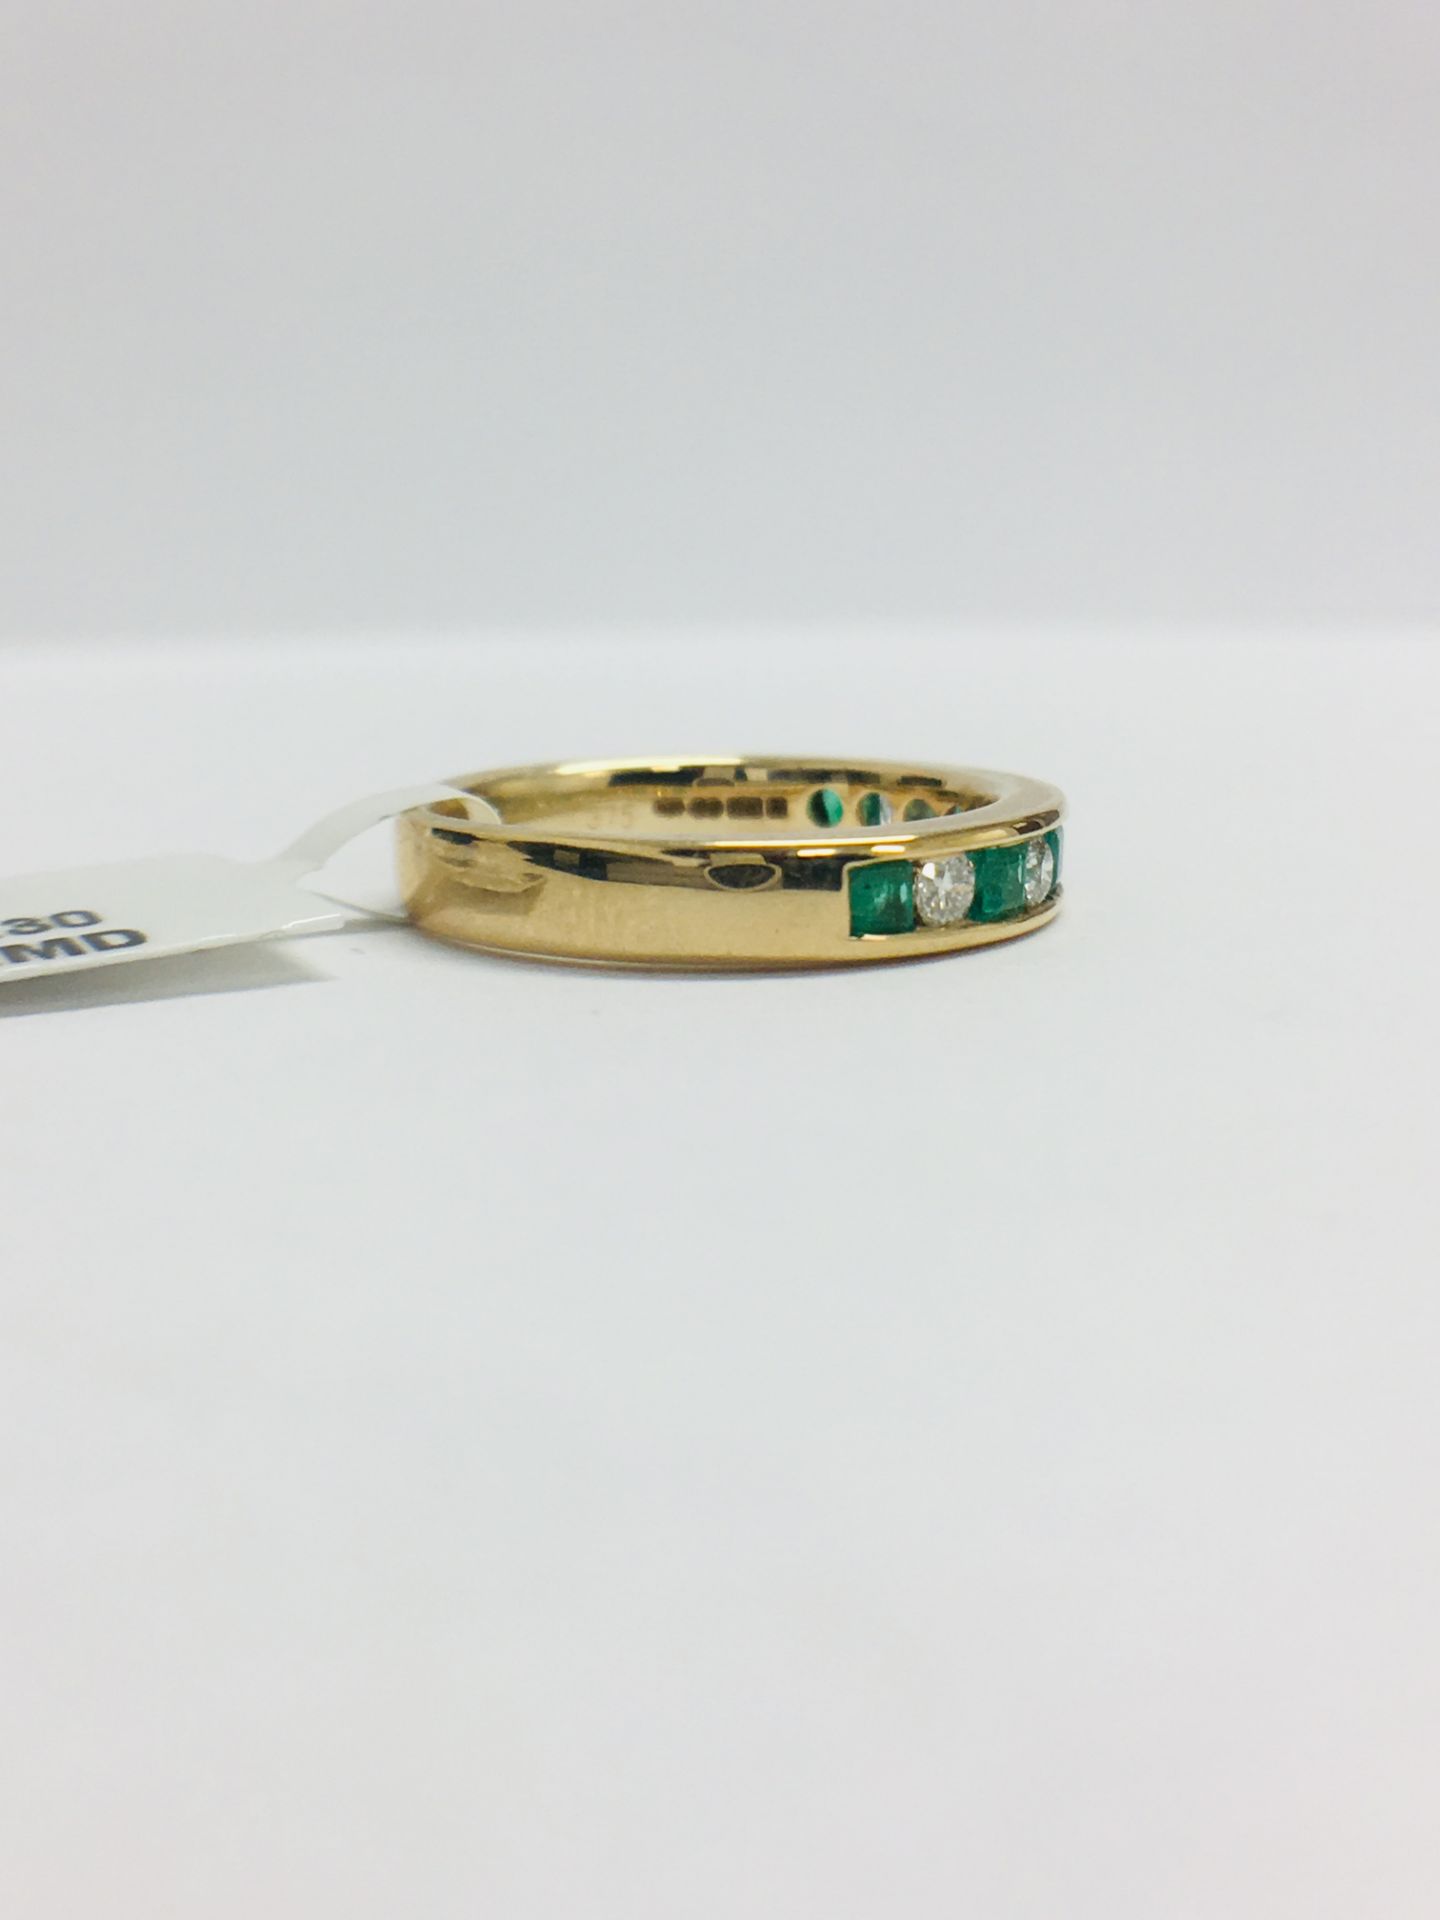 9ct Yellow Gold Emerald Diamond Channel Set Eternity Ring - Image 8 of 13